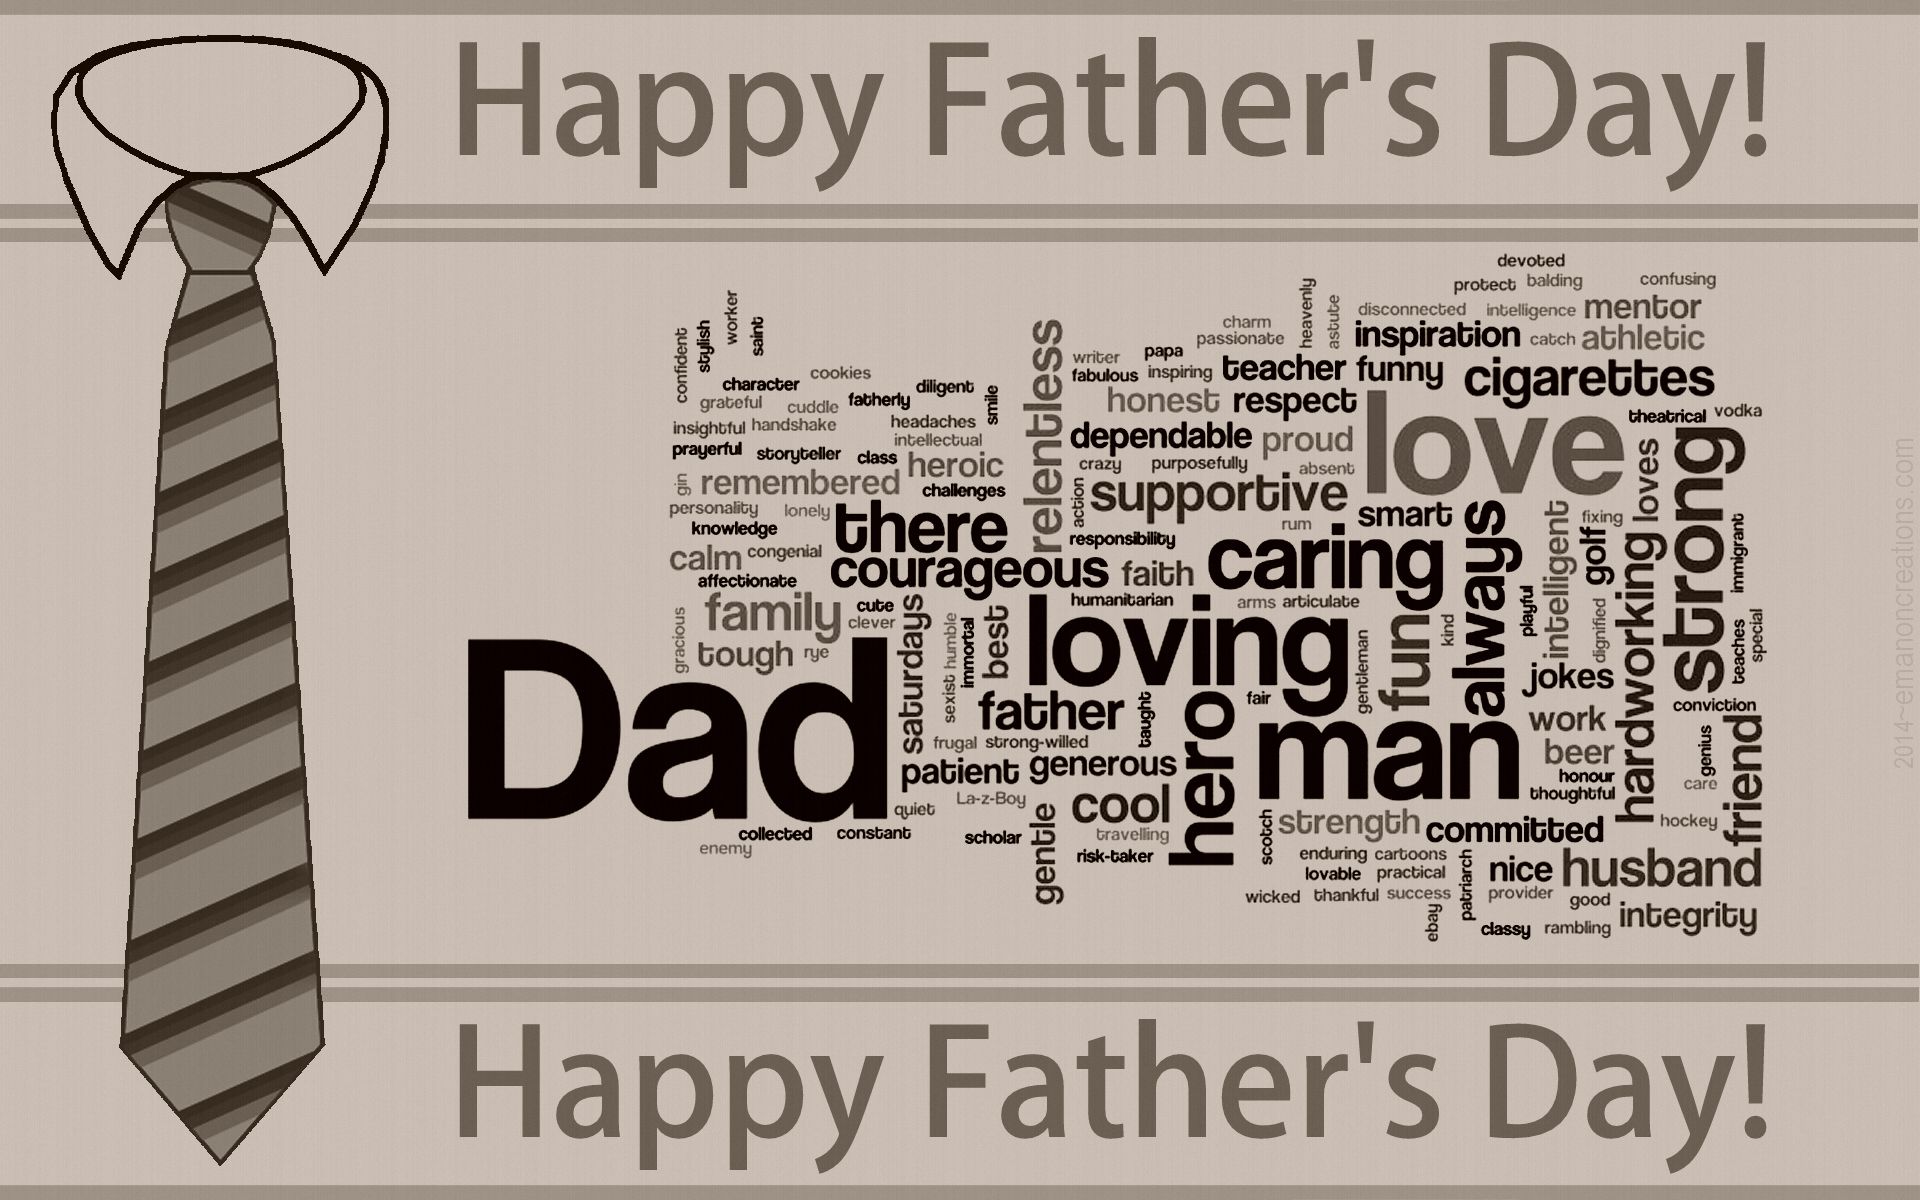 Happy Fathers Day Image 2019: Fathers Day Picture Photo Cards